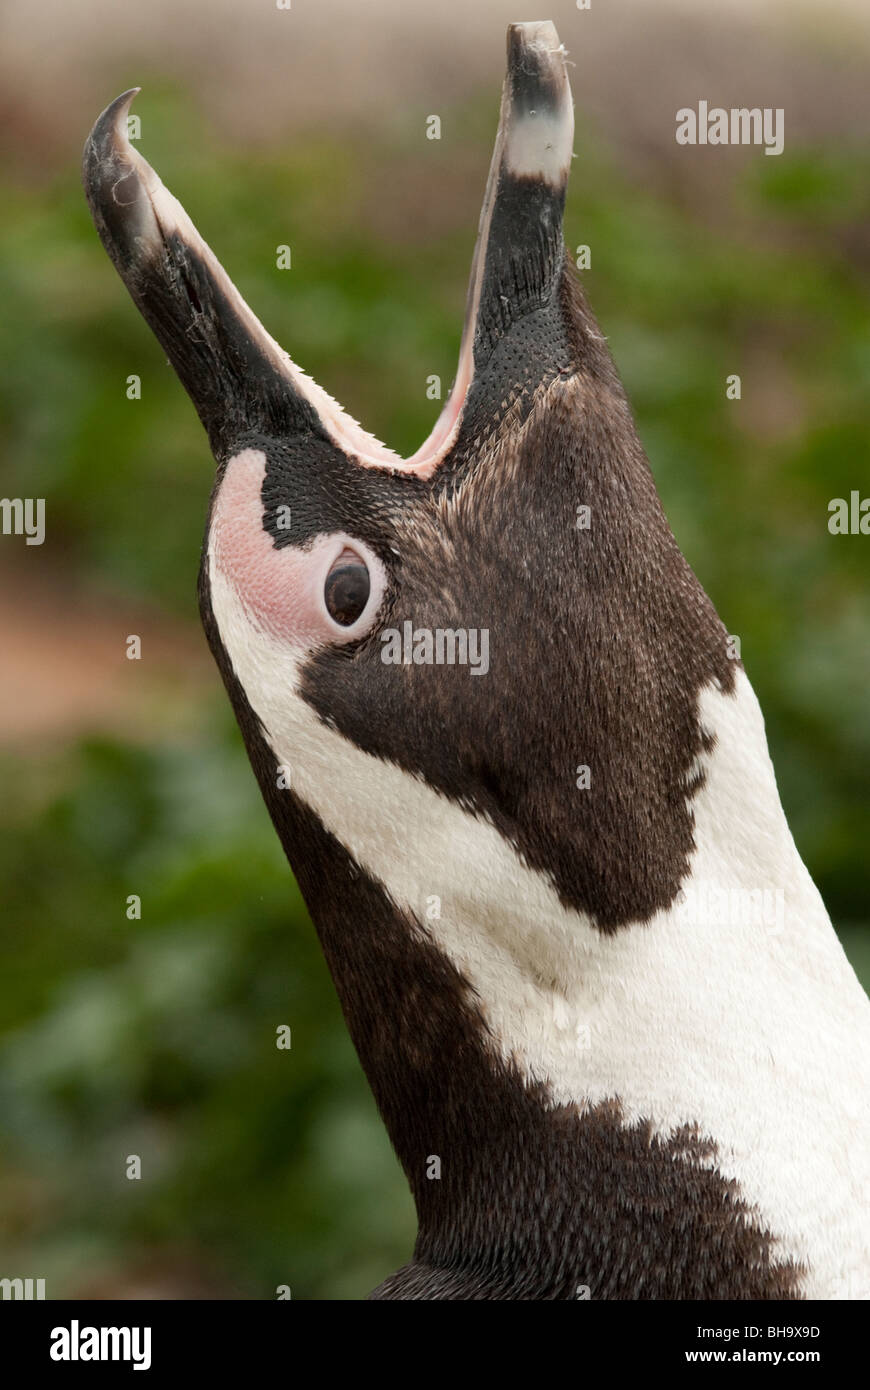 Close up of an African penguin calling, Stock Photo